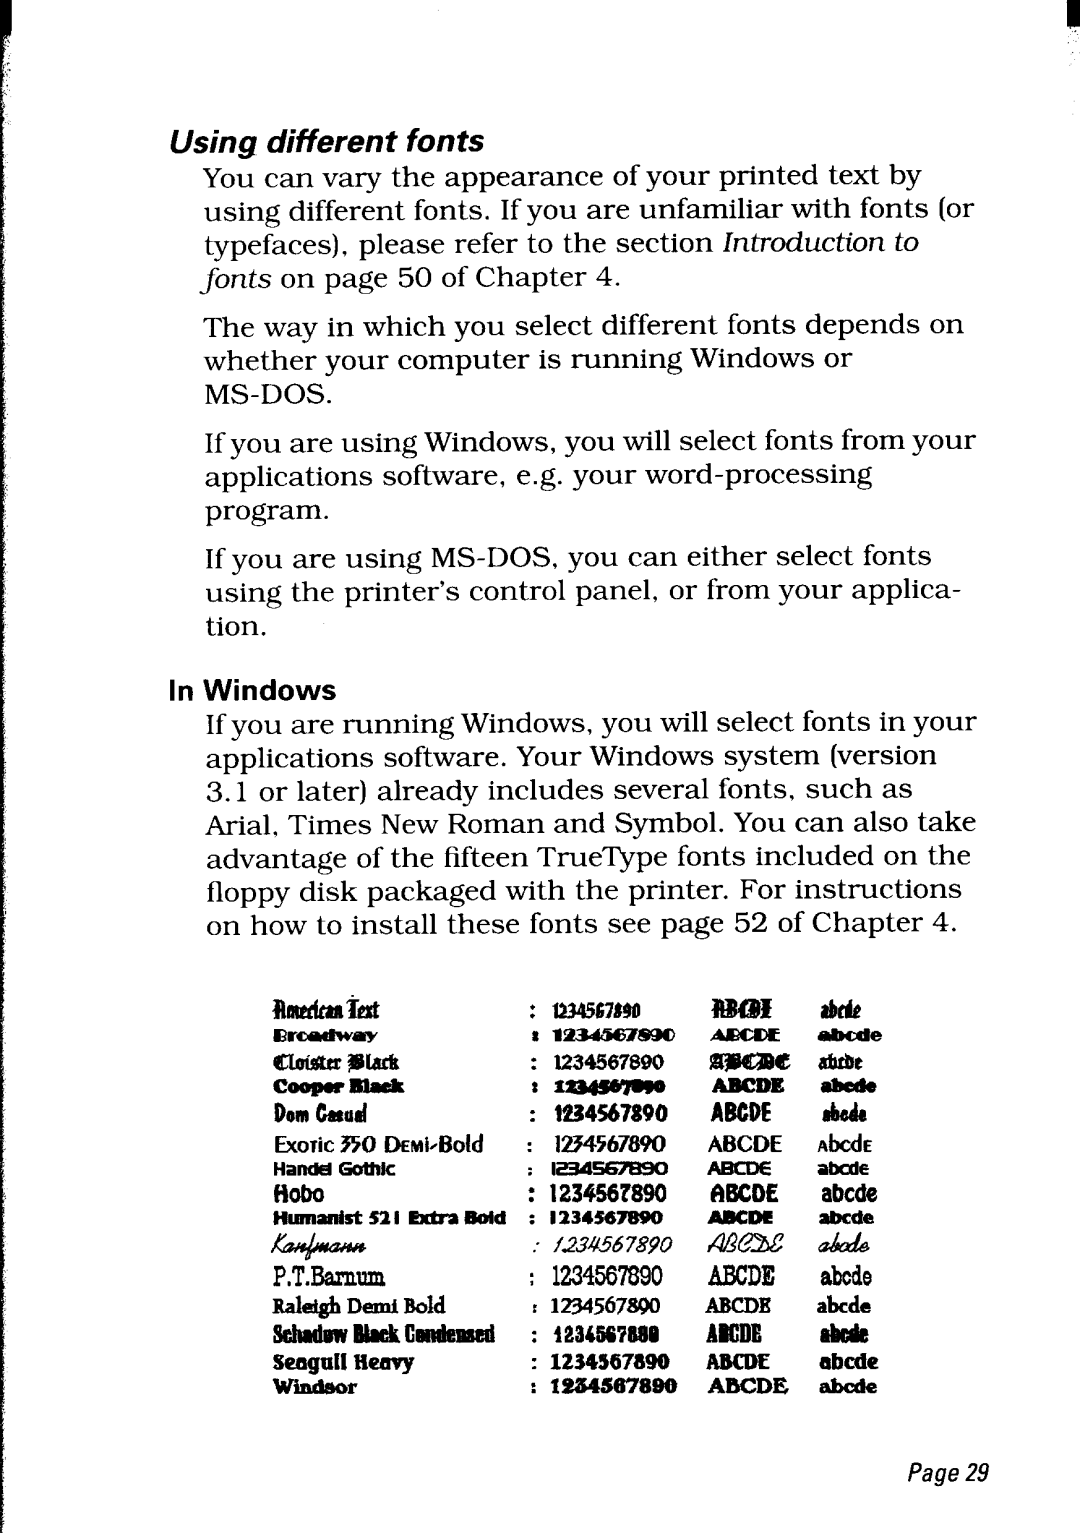 Star Micronics LC24-30 user manual Using different fonts, 1234!567890 ABCDE, In Windows, 2ch6dm8lackc, mlgnll, Heavy 